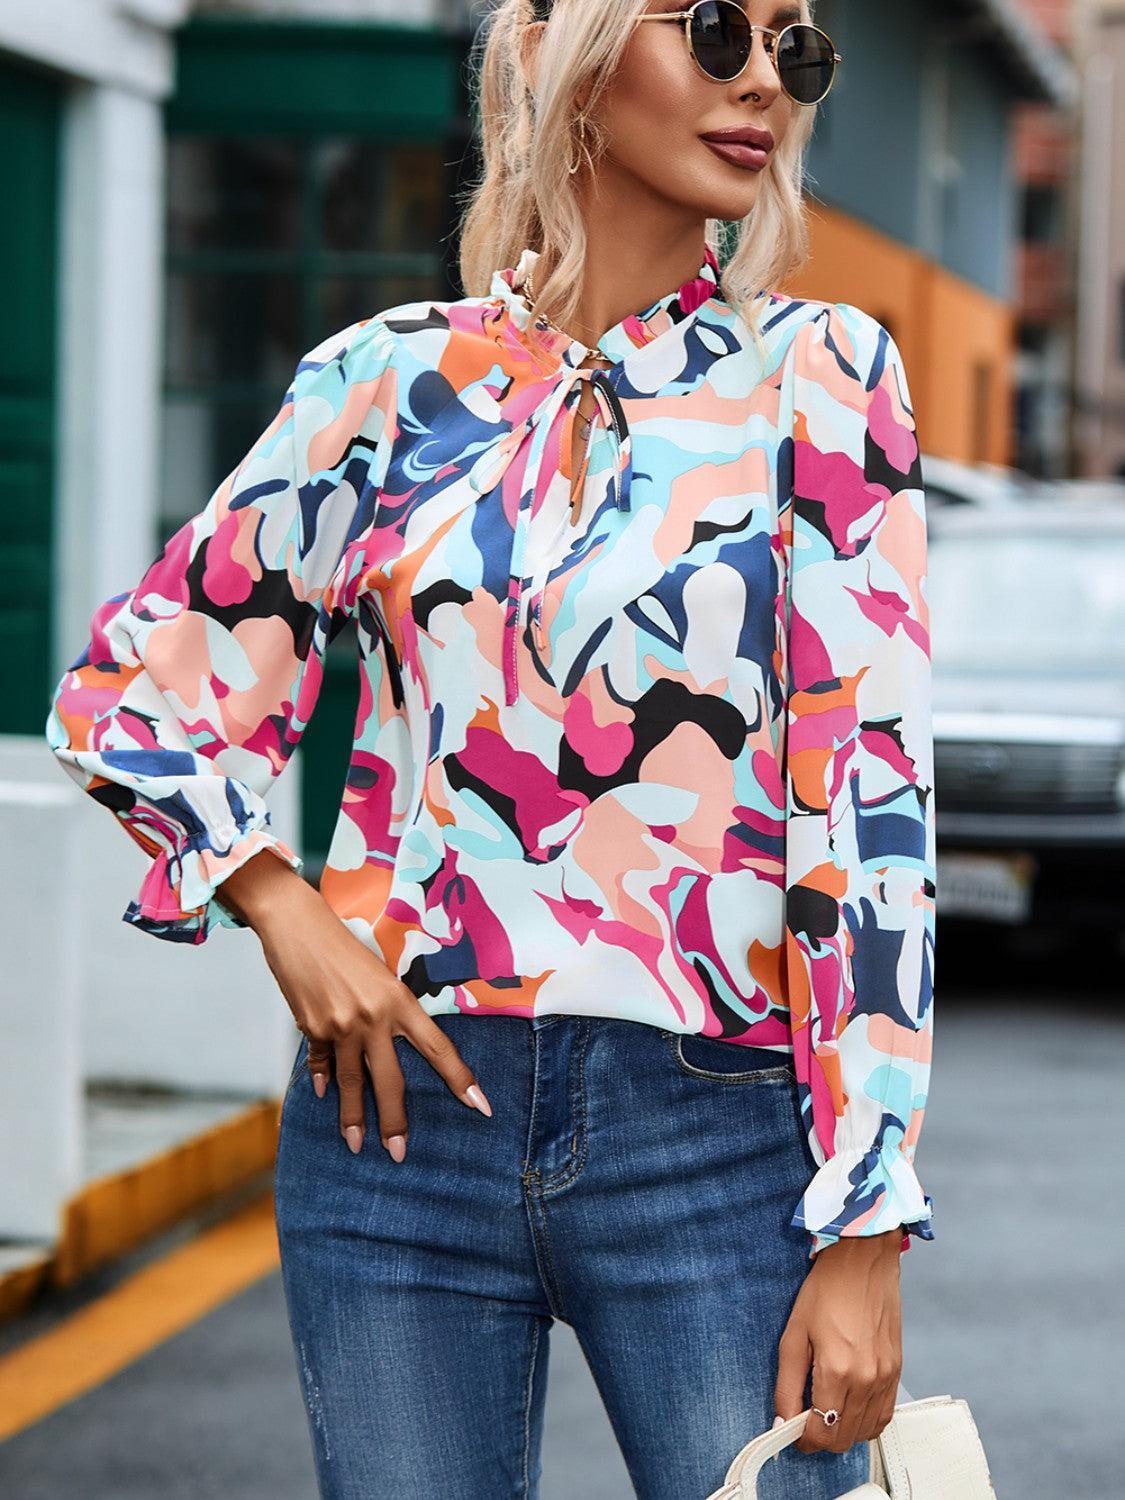 a woman wearing a colorful blouse and jeans